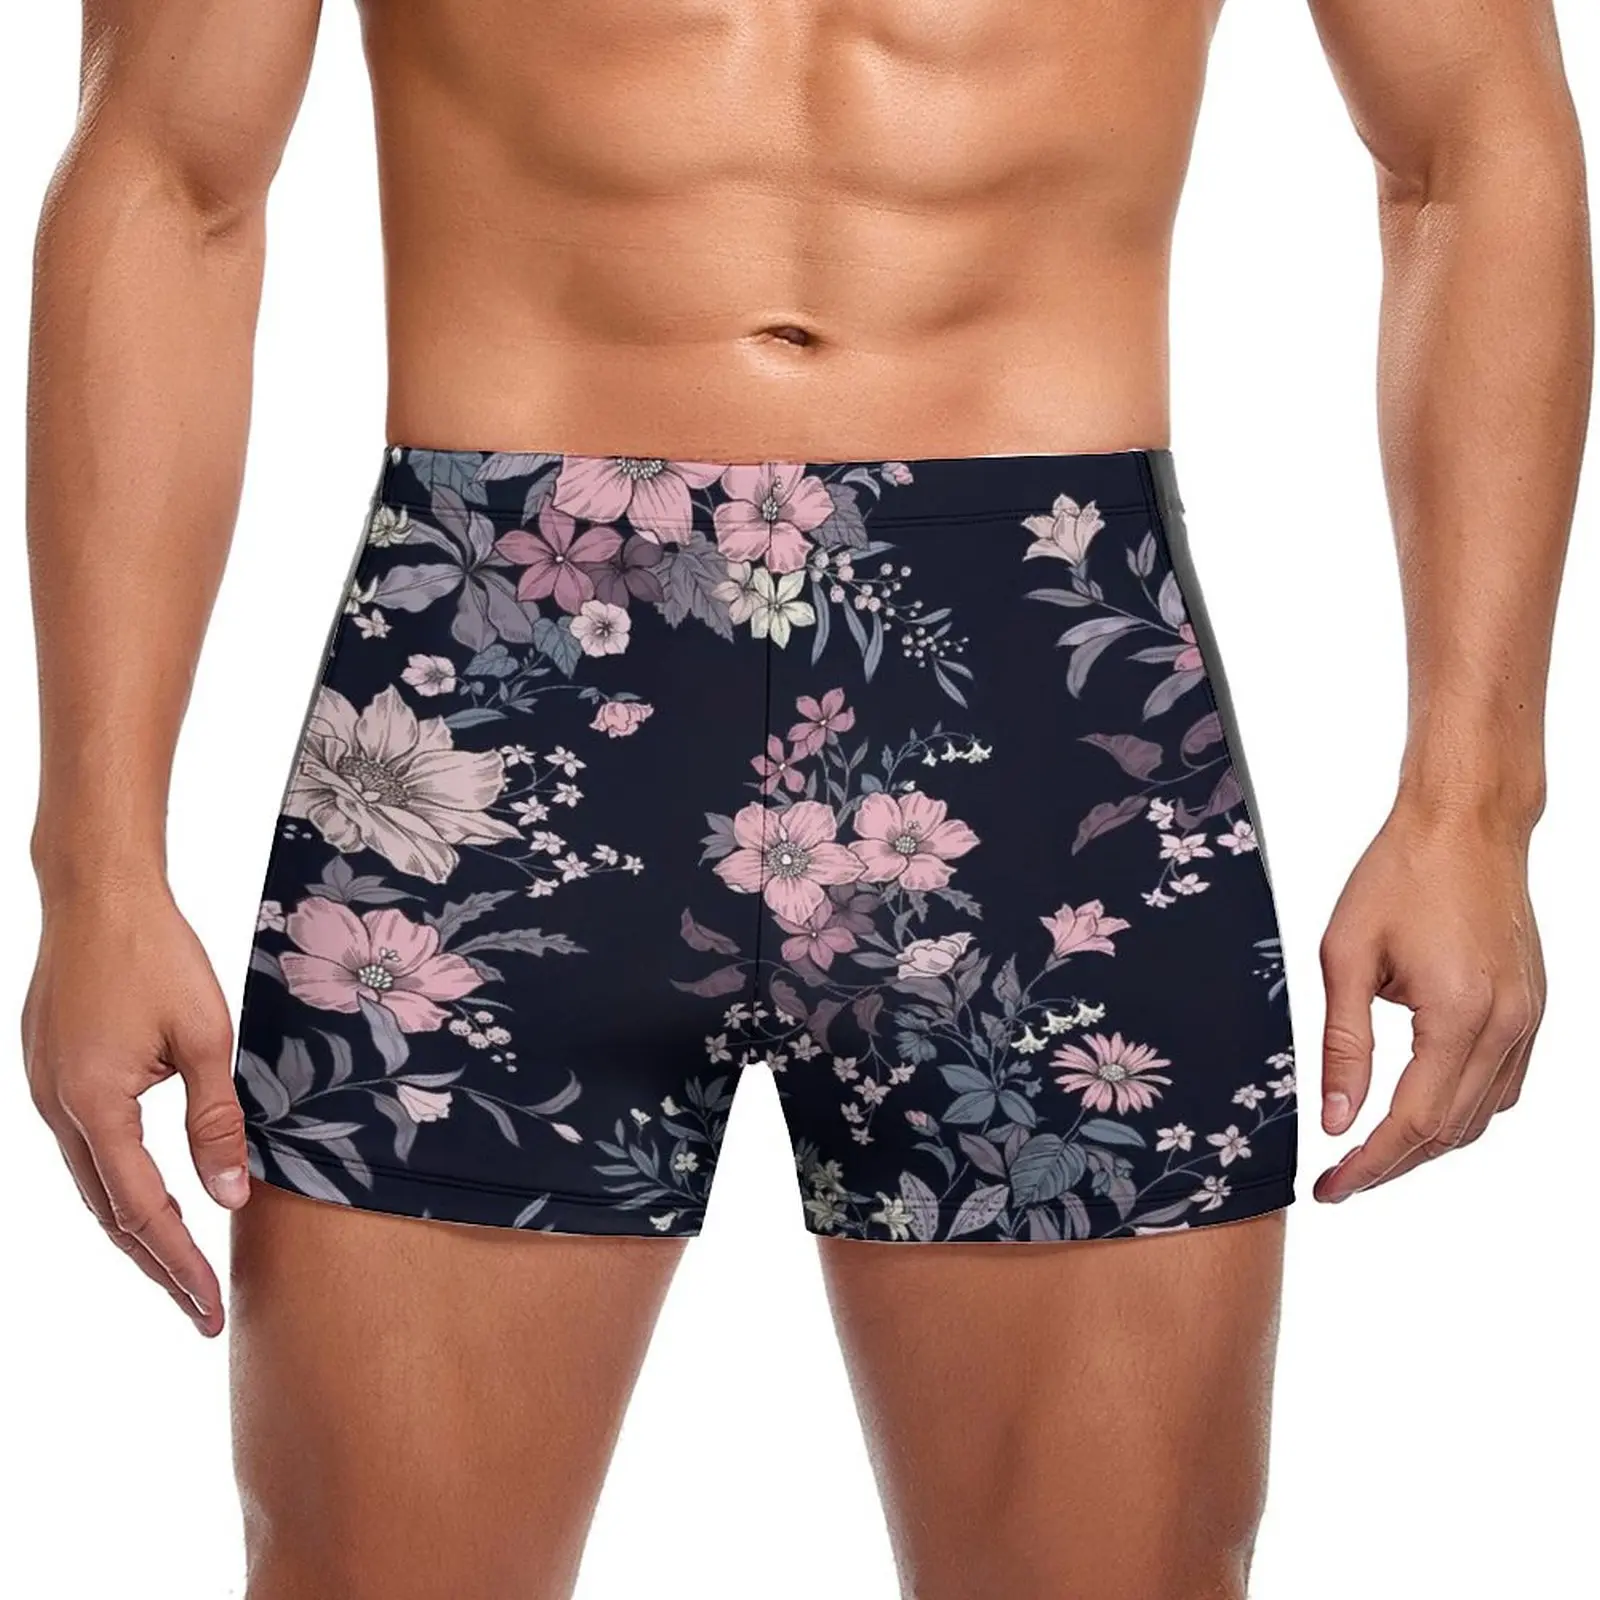 

Pink Floral Print Swimming Trunks Vintage Tropical Flowers Stay-in-Shape Fashion Swim Boxers Large Size Training Man Swimwear